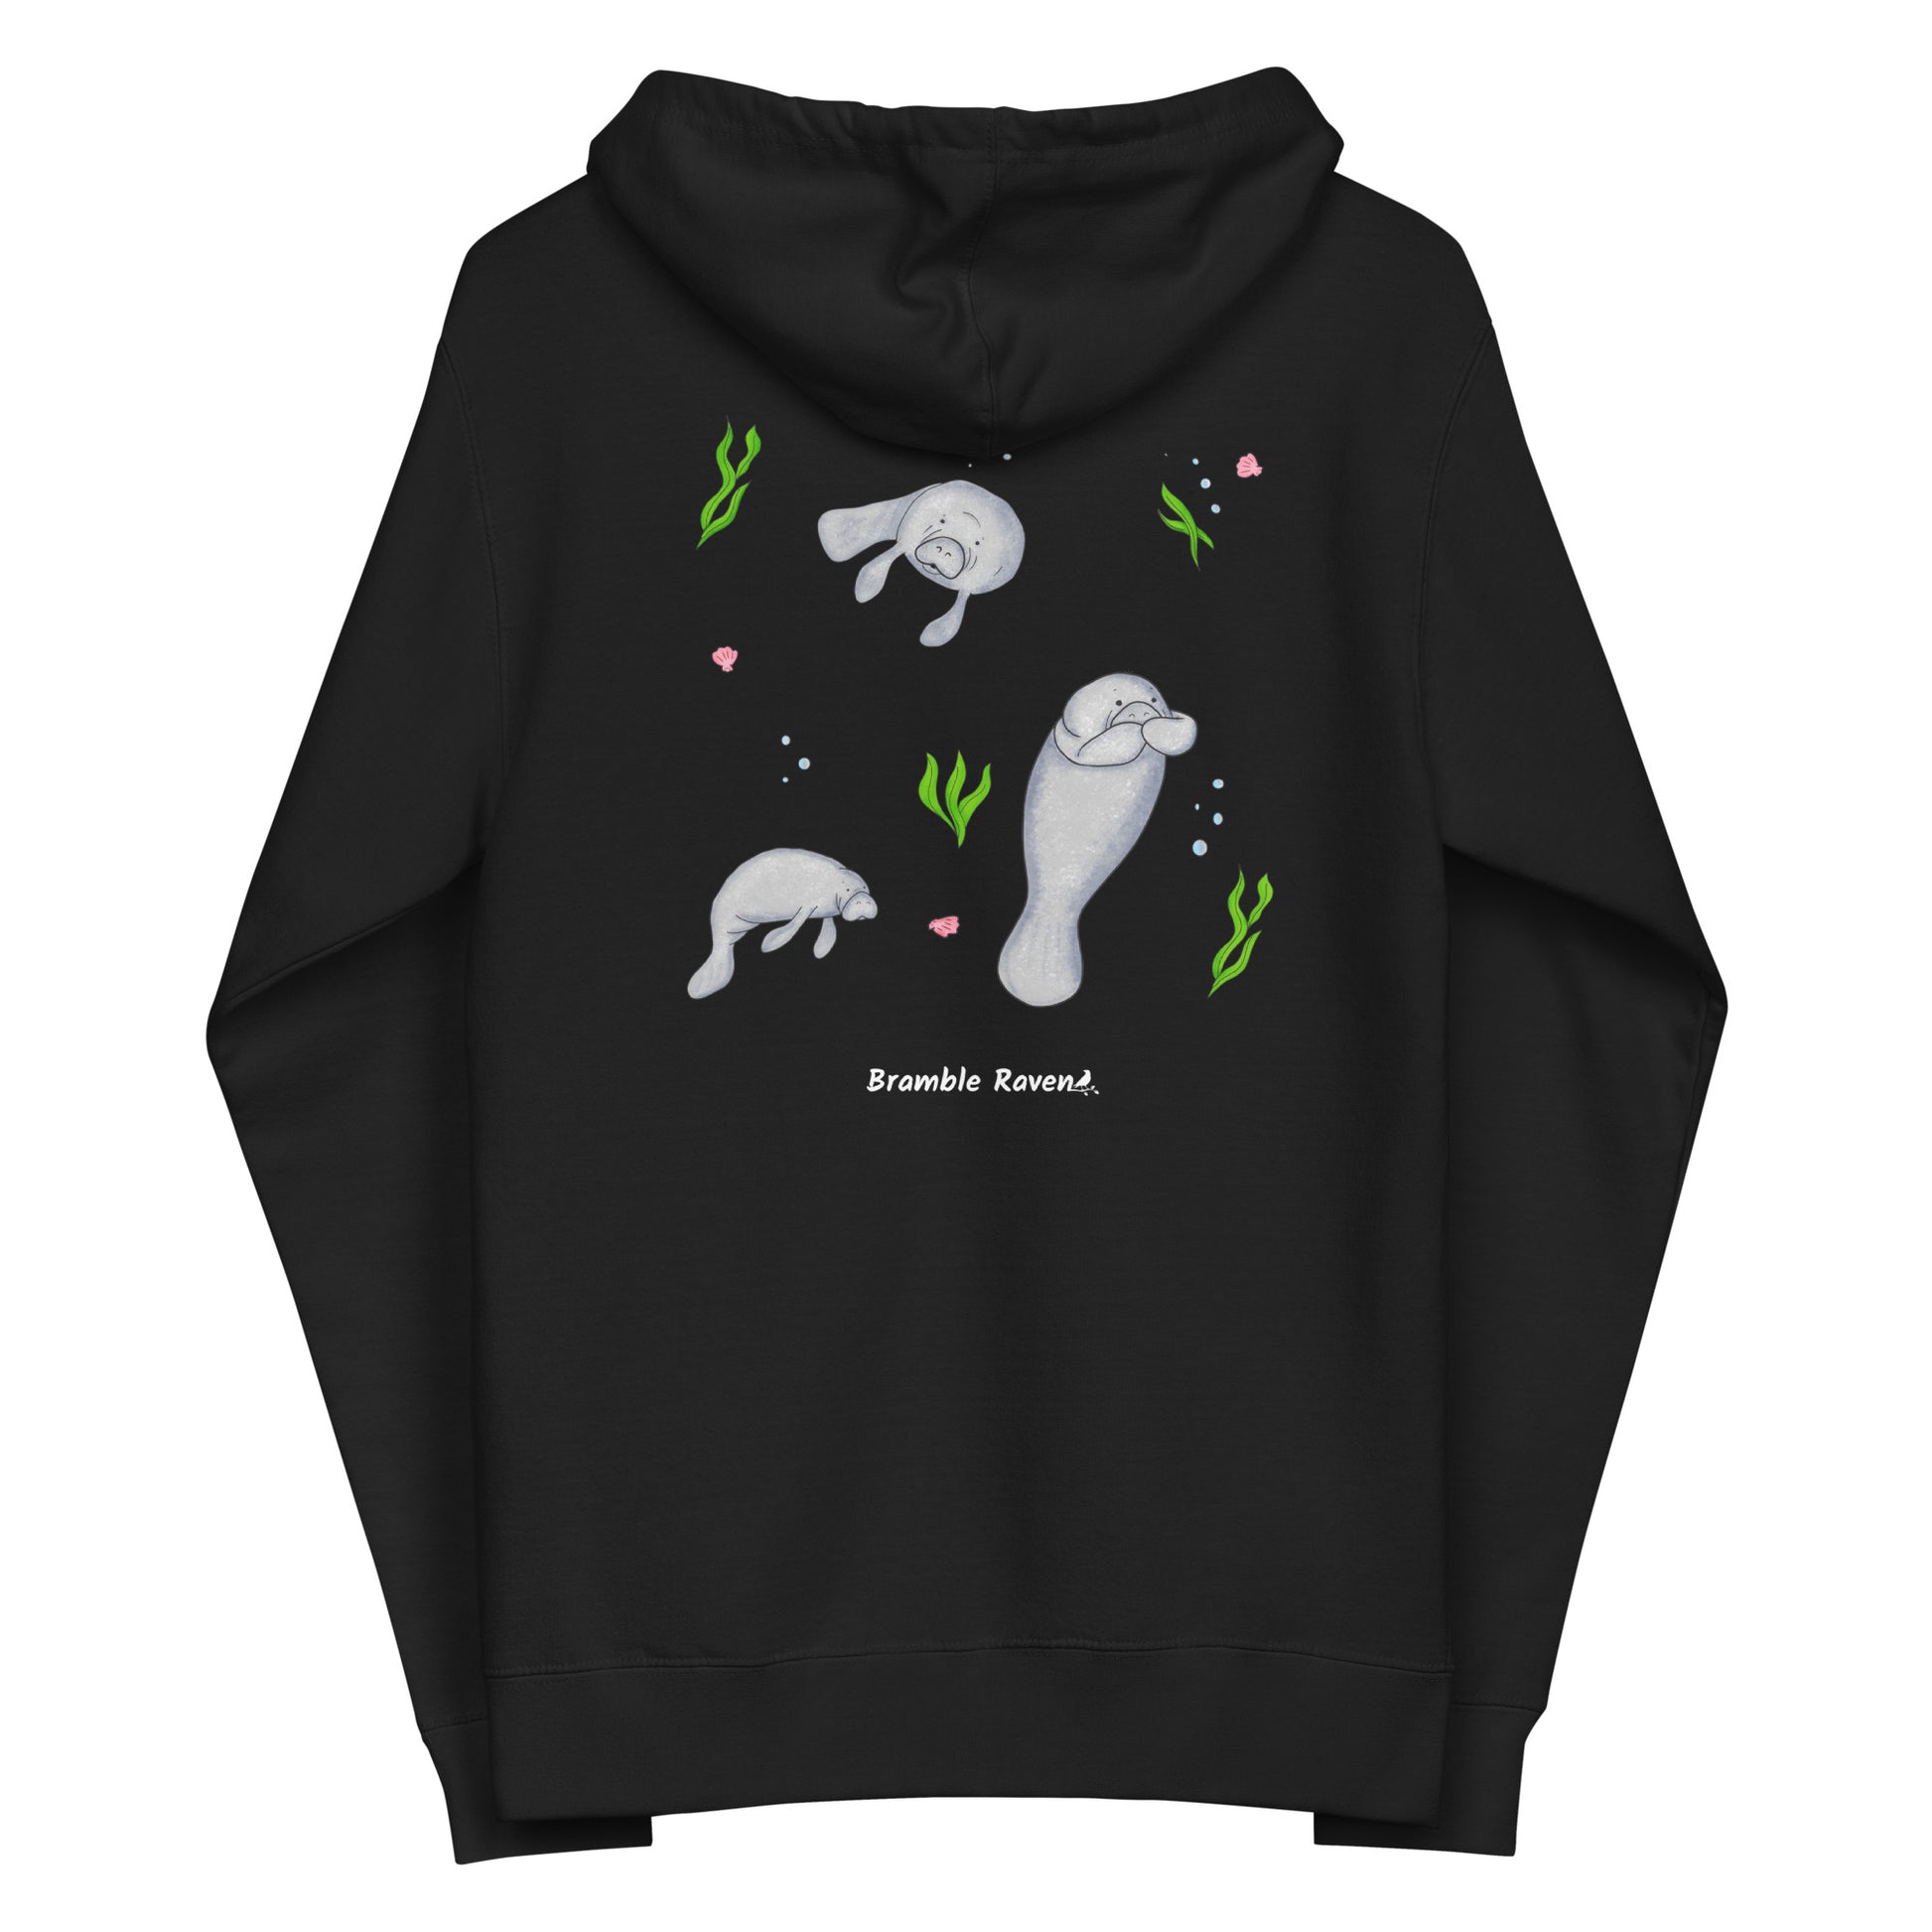 Black colored unisex zip-up hoodie. Features three manatees with seaweed, seashells, and bubbles on the back. It is made of soft, premium quality fleece fabric and has a jersey-lined hood. Made with 100% cotton face and 80% cotton, 20% polyester blend fleece (Charcoal Heather is 55% cotton, 45% polyester). Features metal eyelets and zipper.